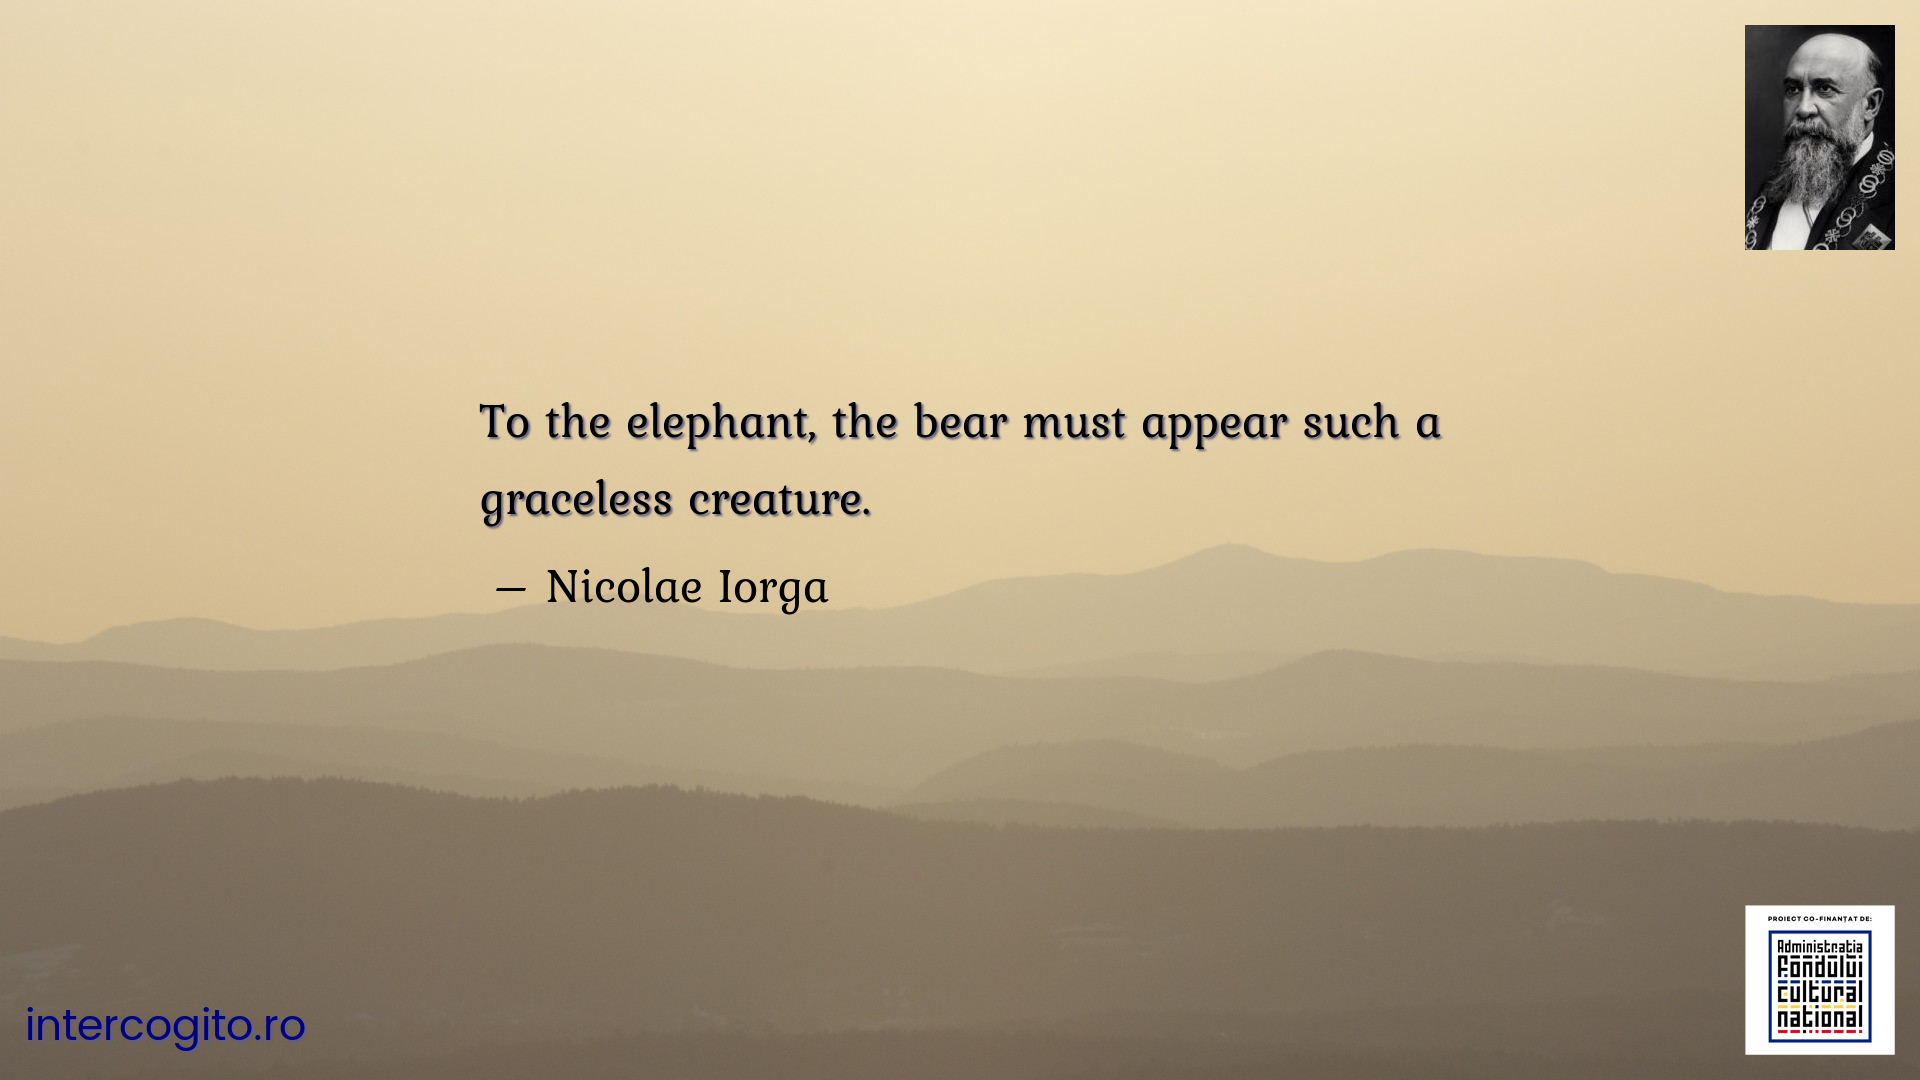 To the elephant, the bear must appear such a graceless creature.